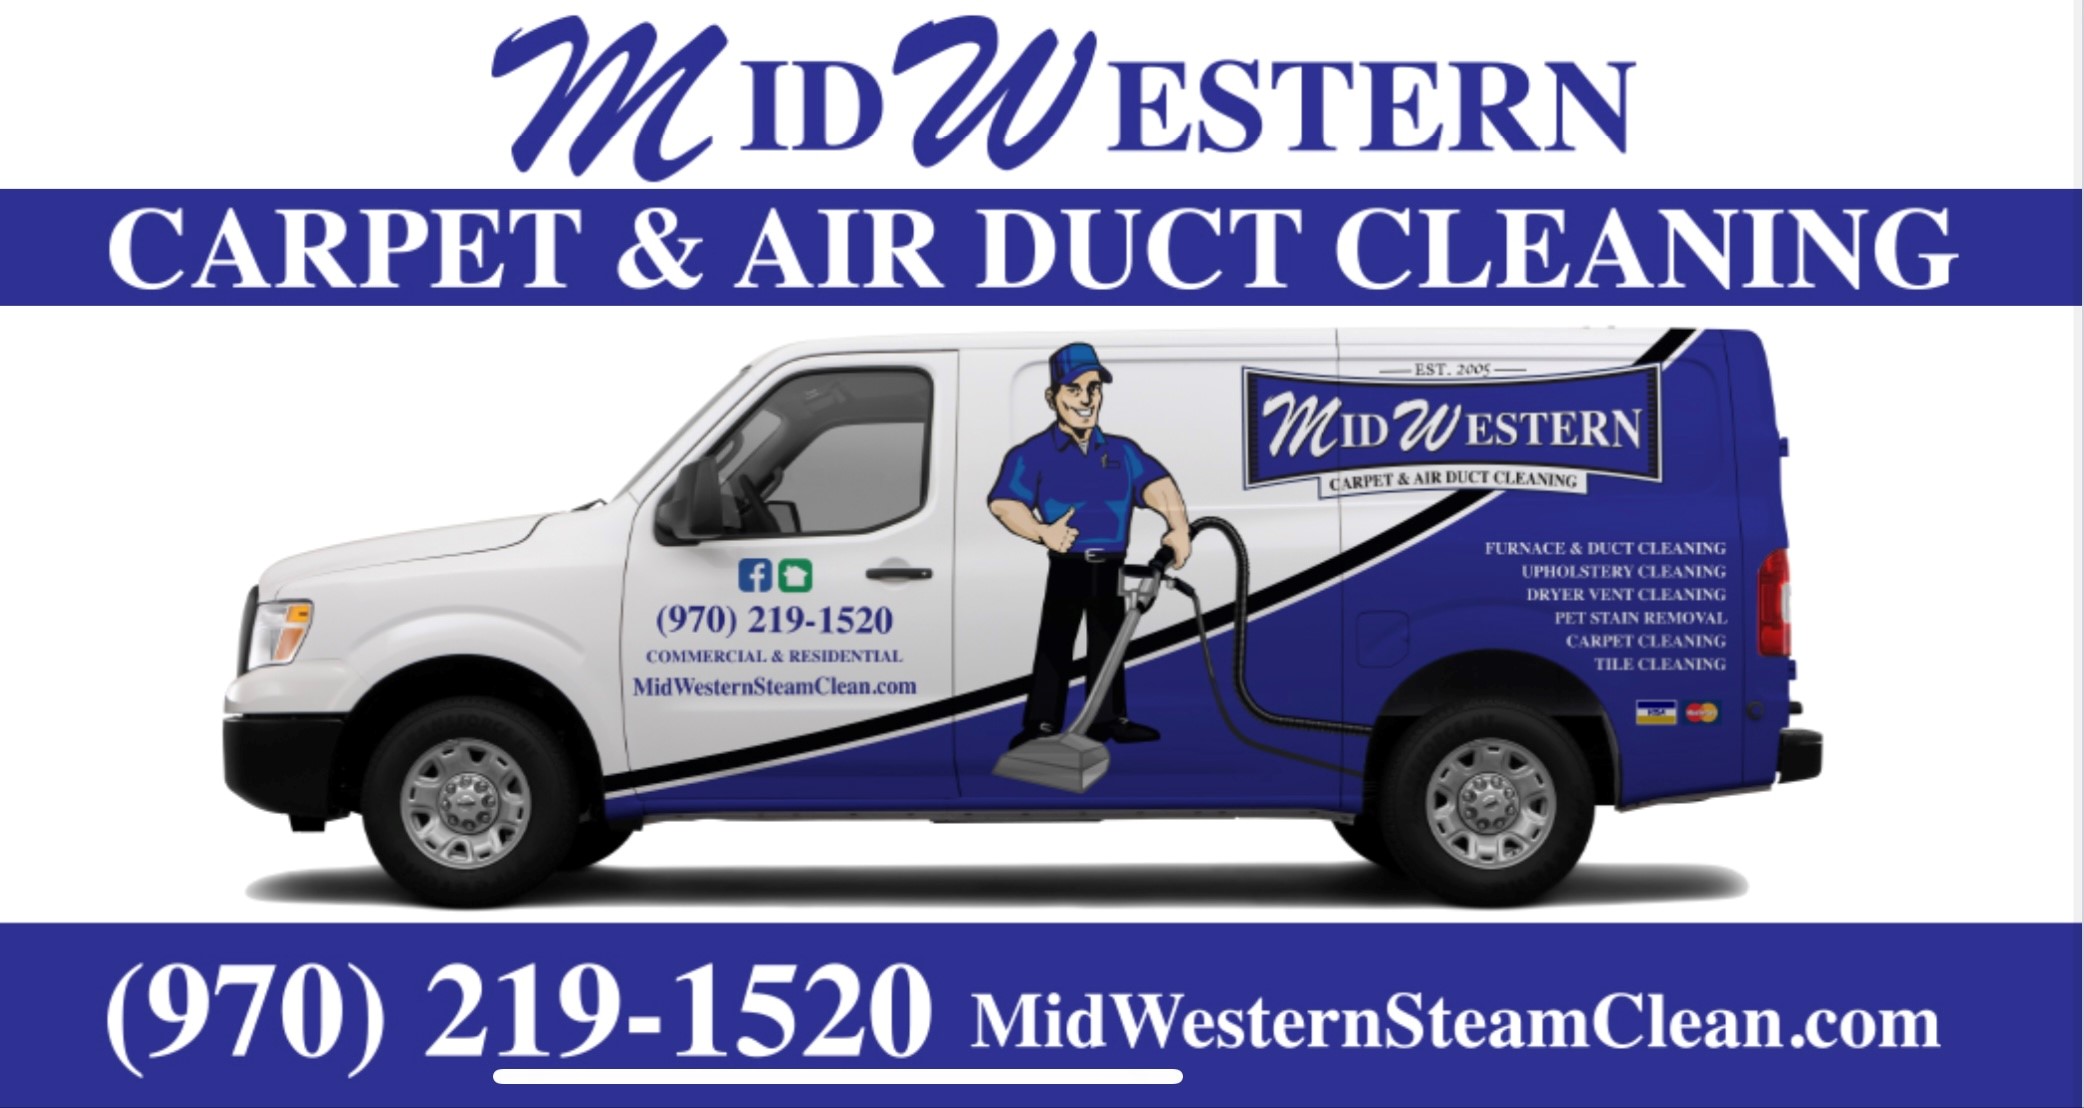 Contact Midwestern Steam Clean